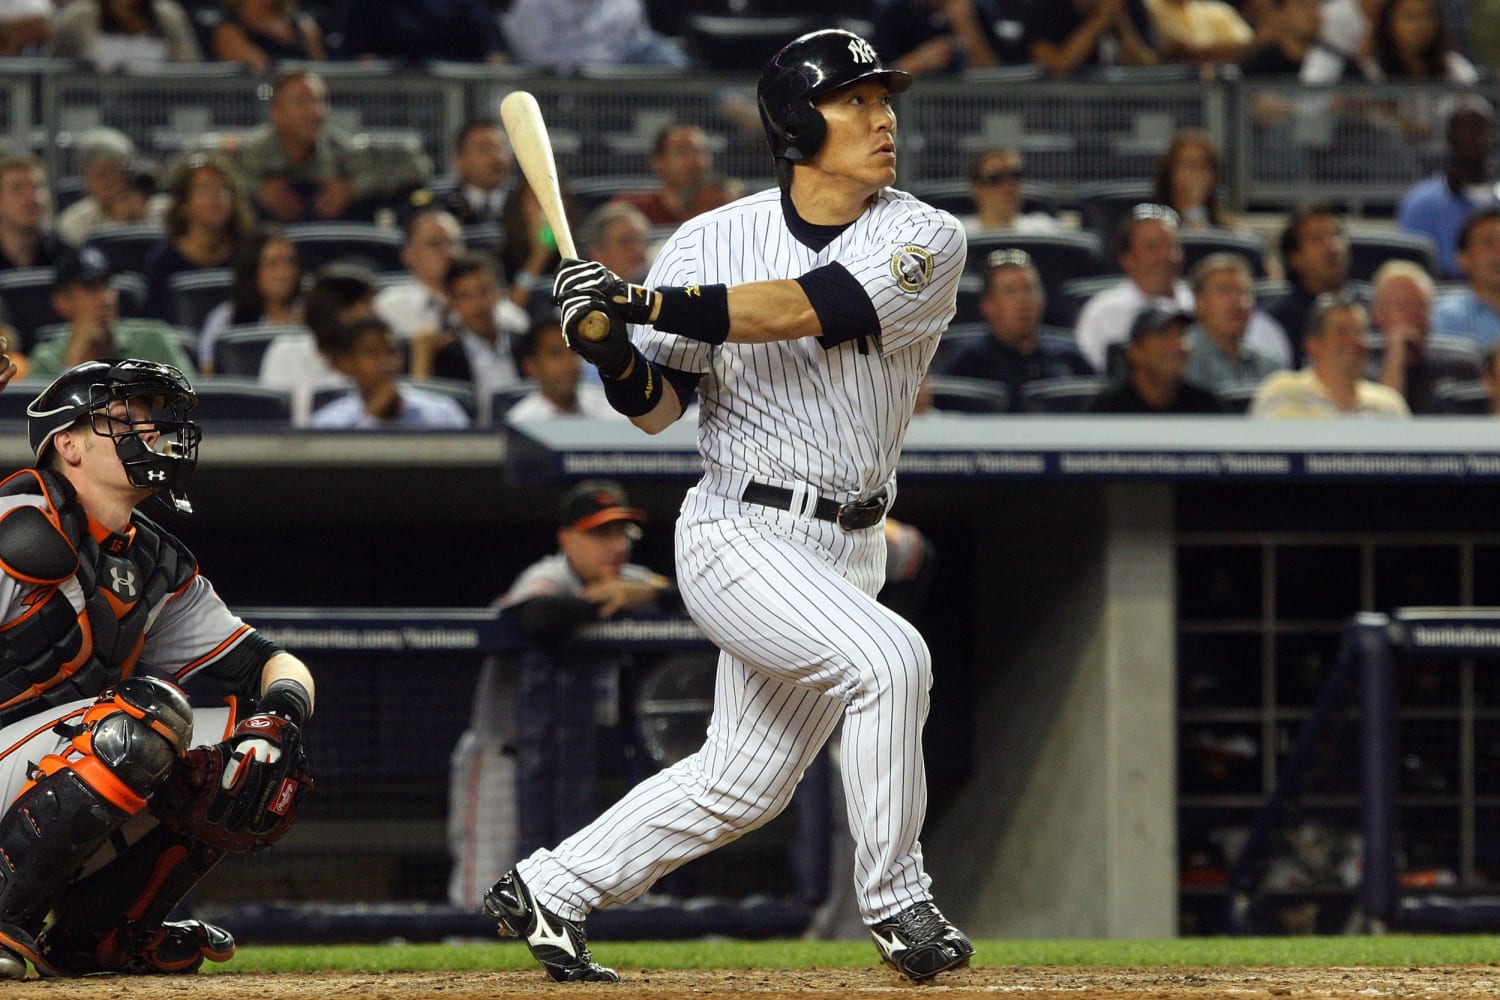 This Day in Yankees History: Hideki Matsui wins a bet - Pinstripe Alley